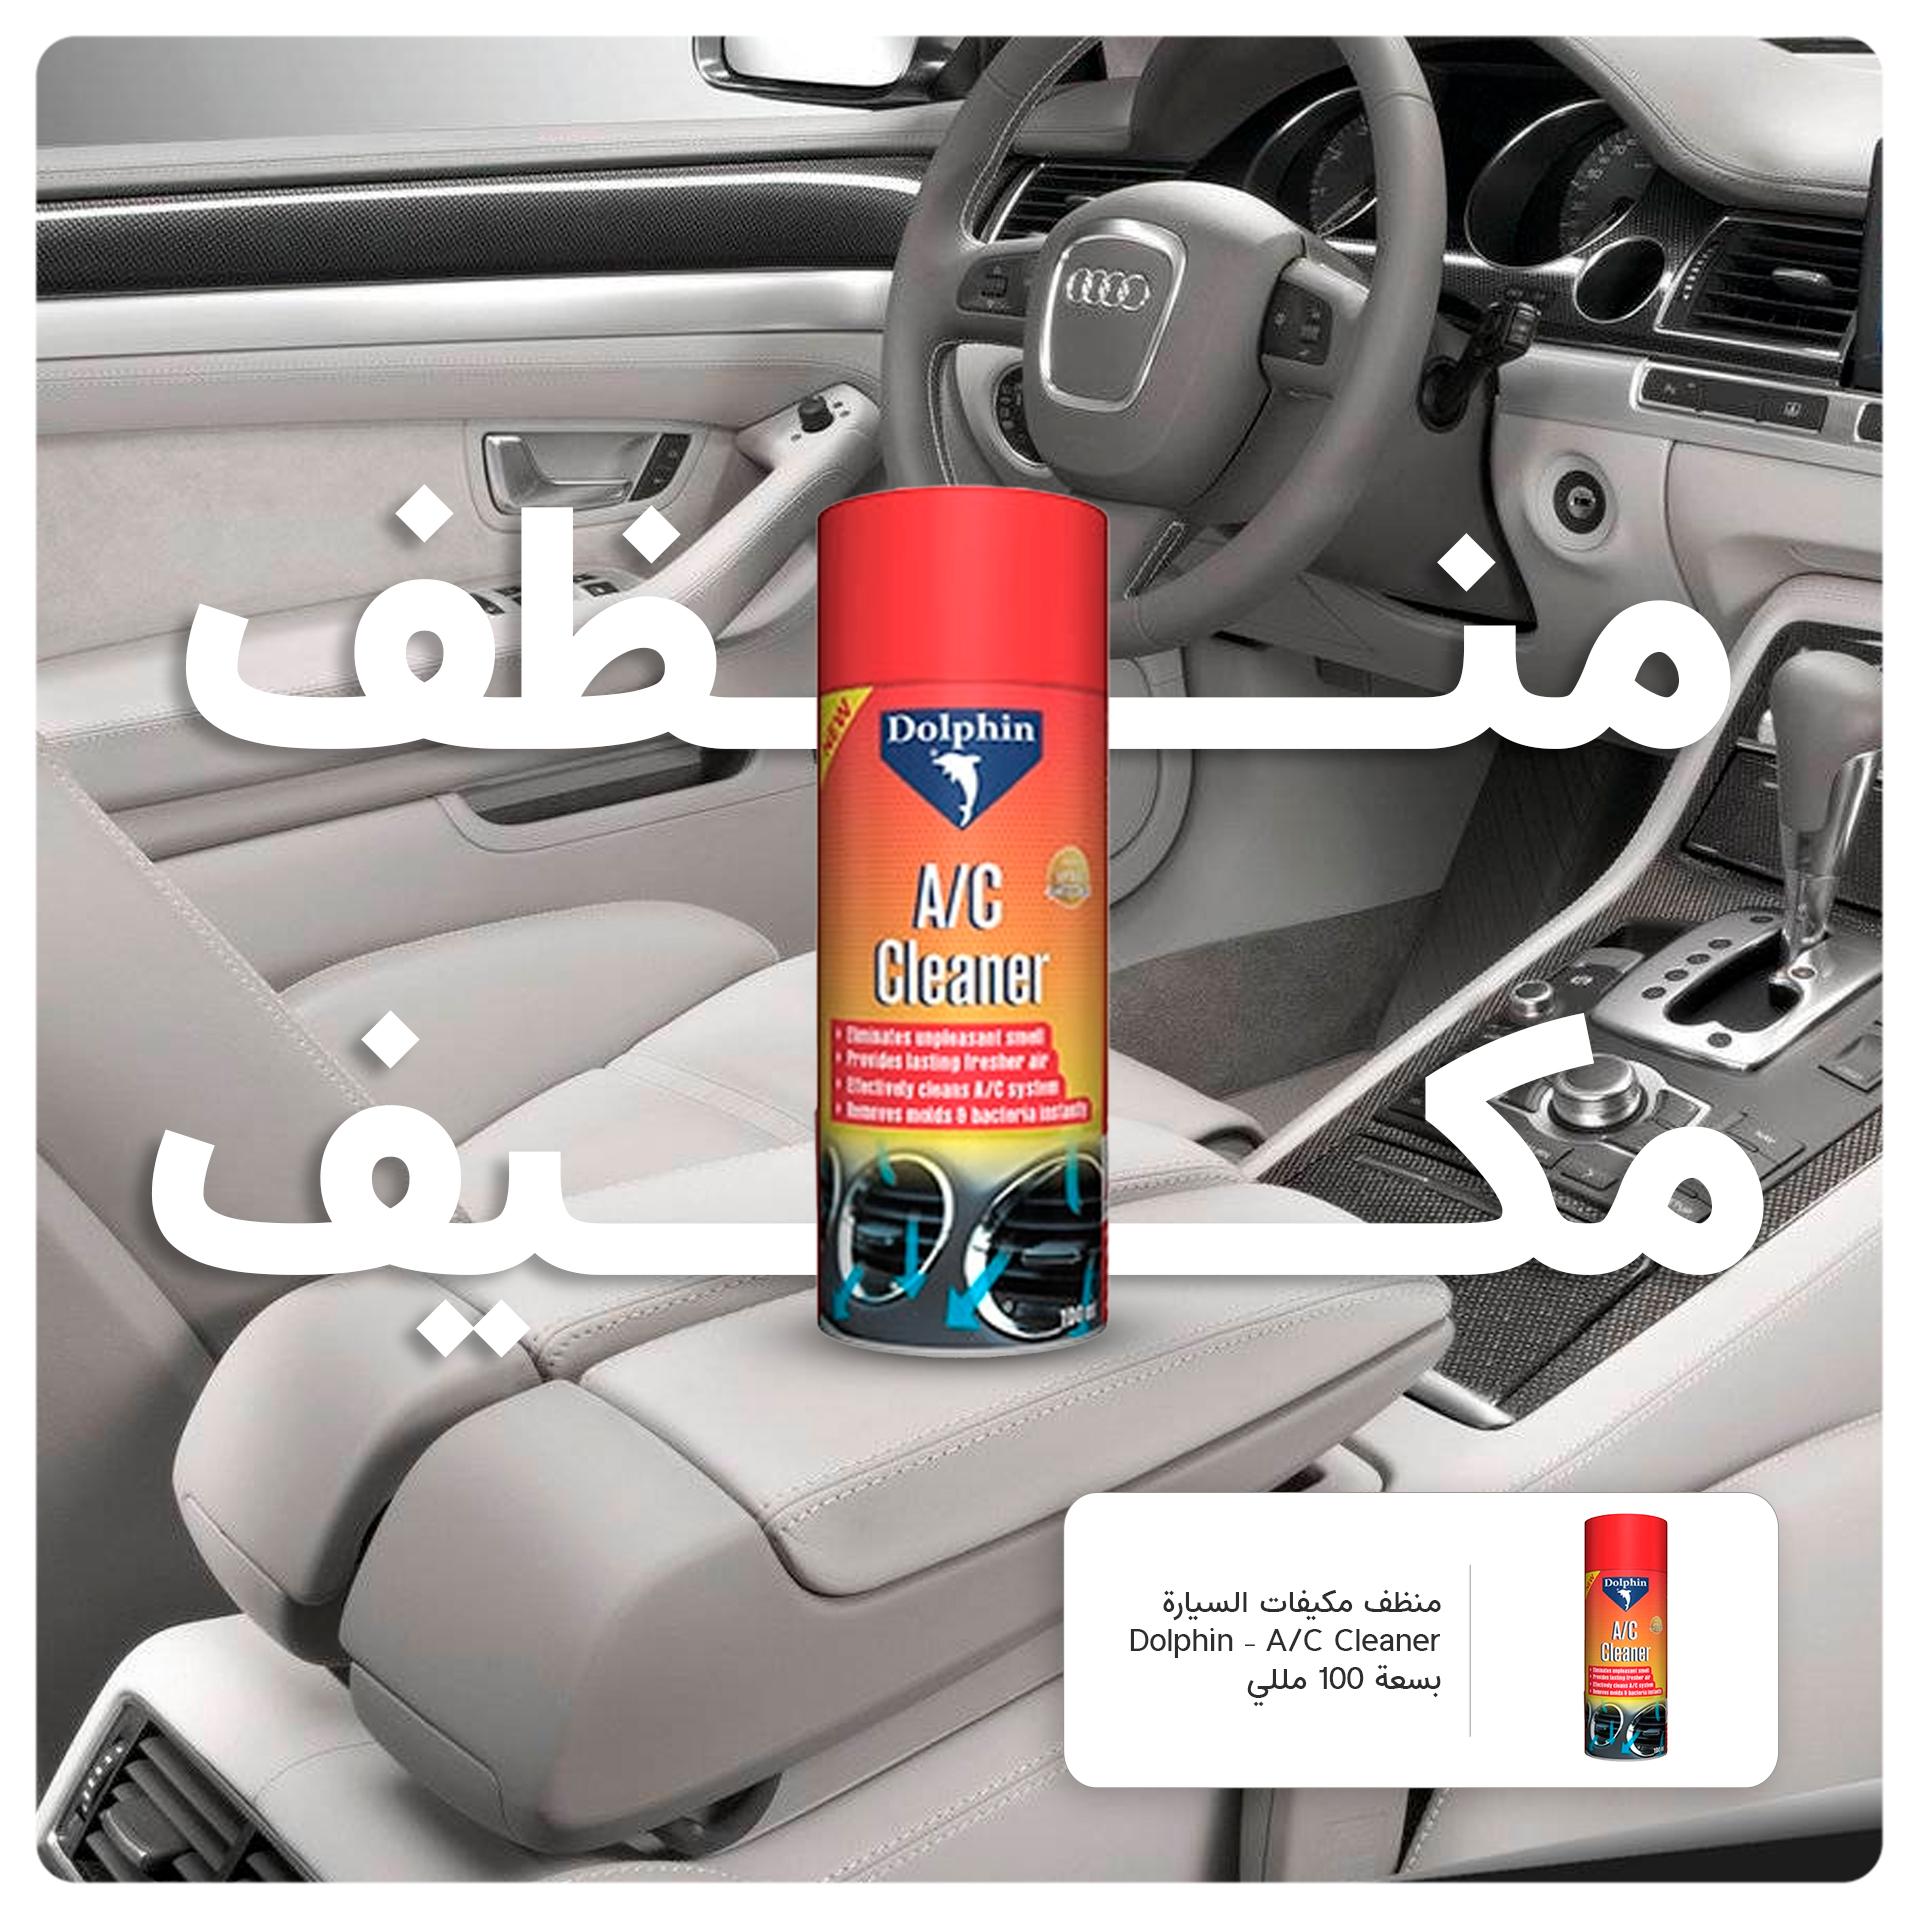 Dolphin – A/C Cleaner 100 ml capacity